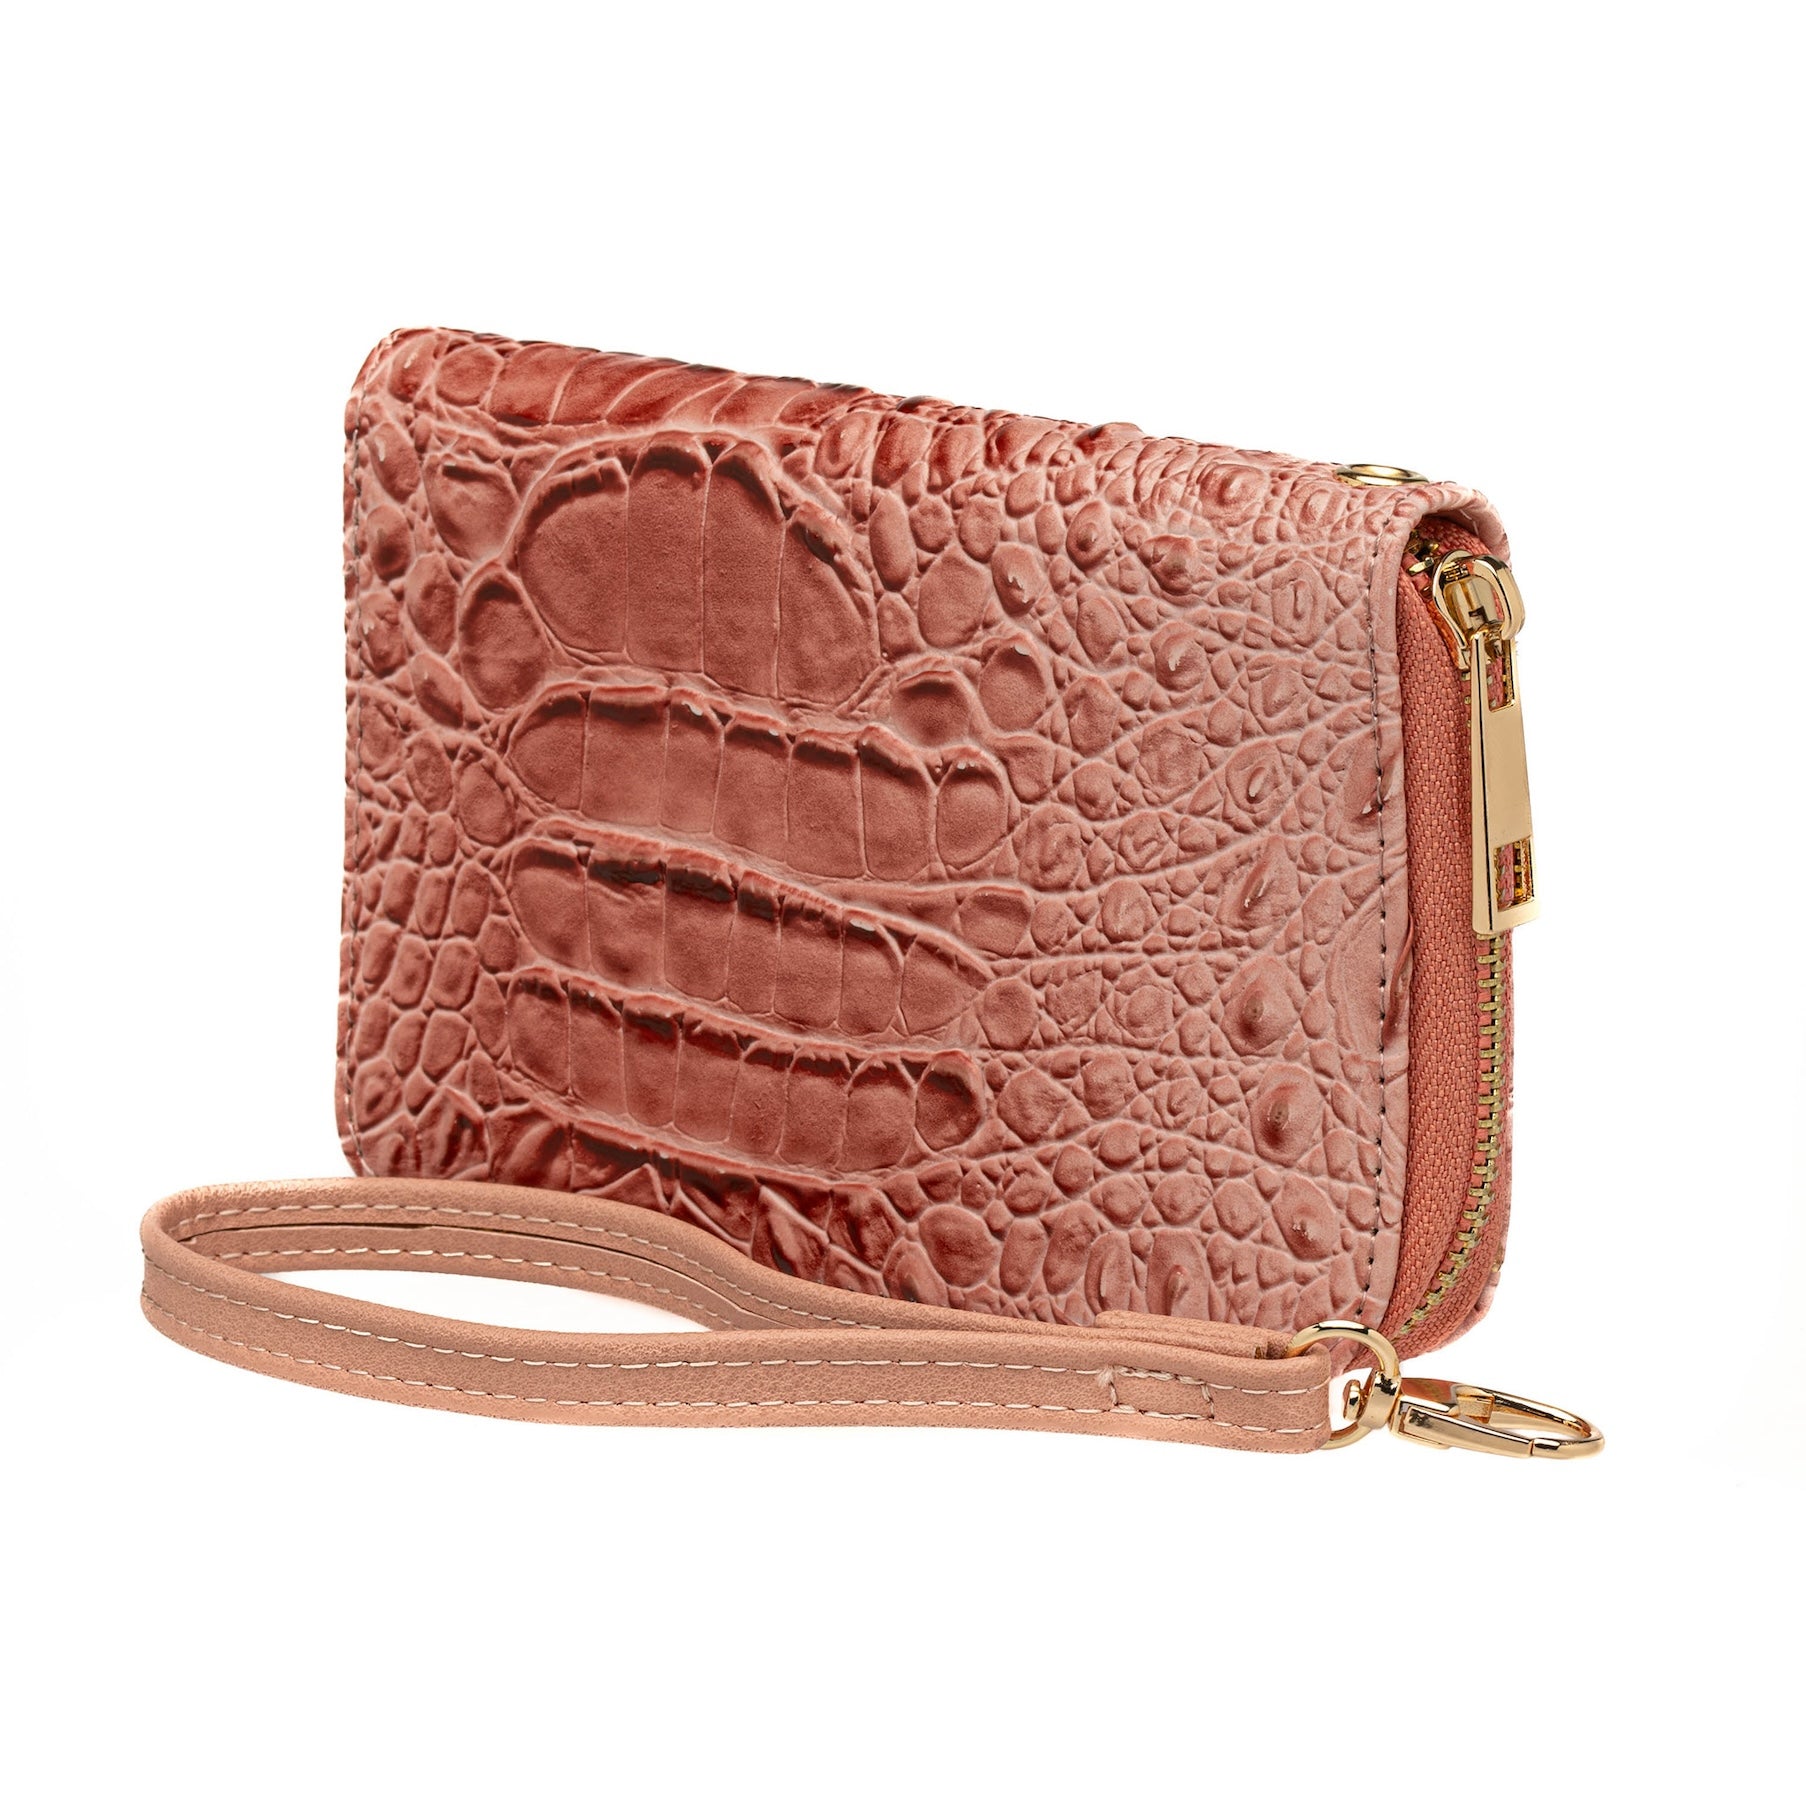 SOMTO WALLET - PINK